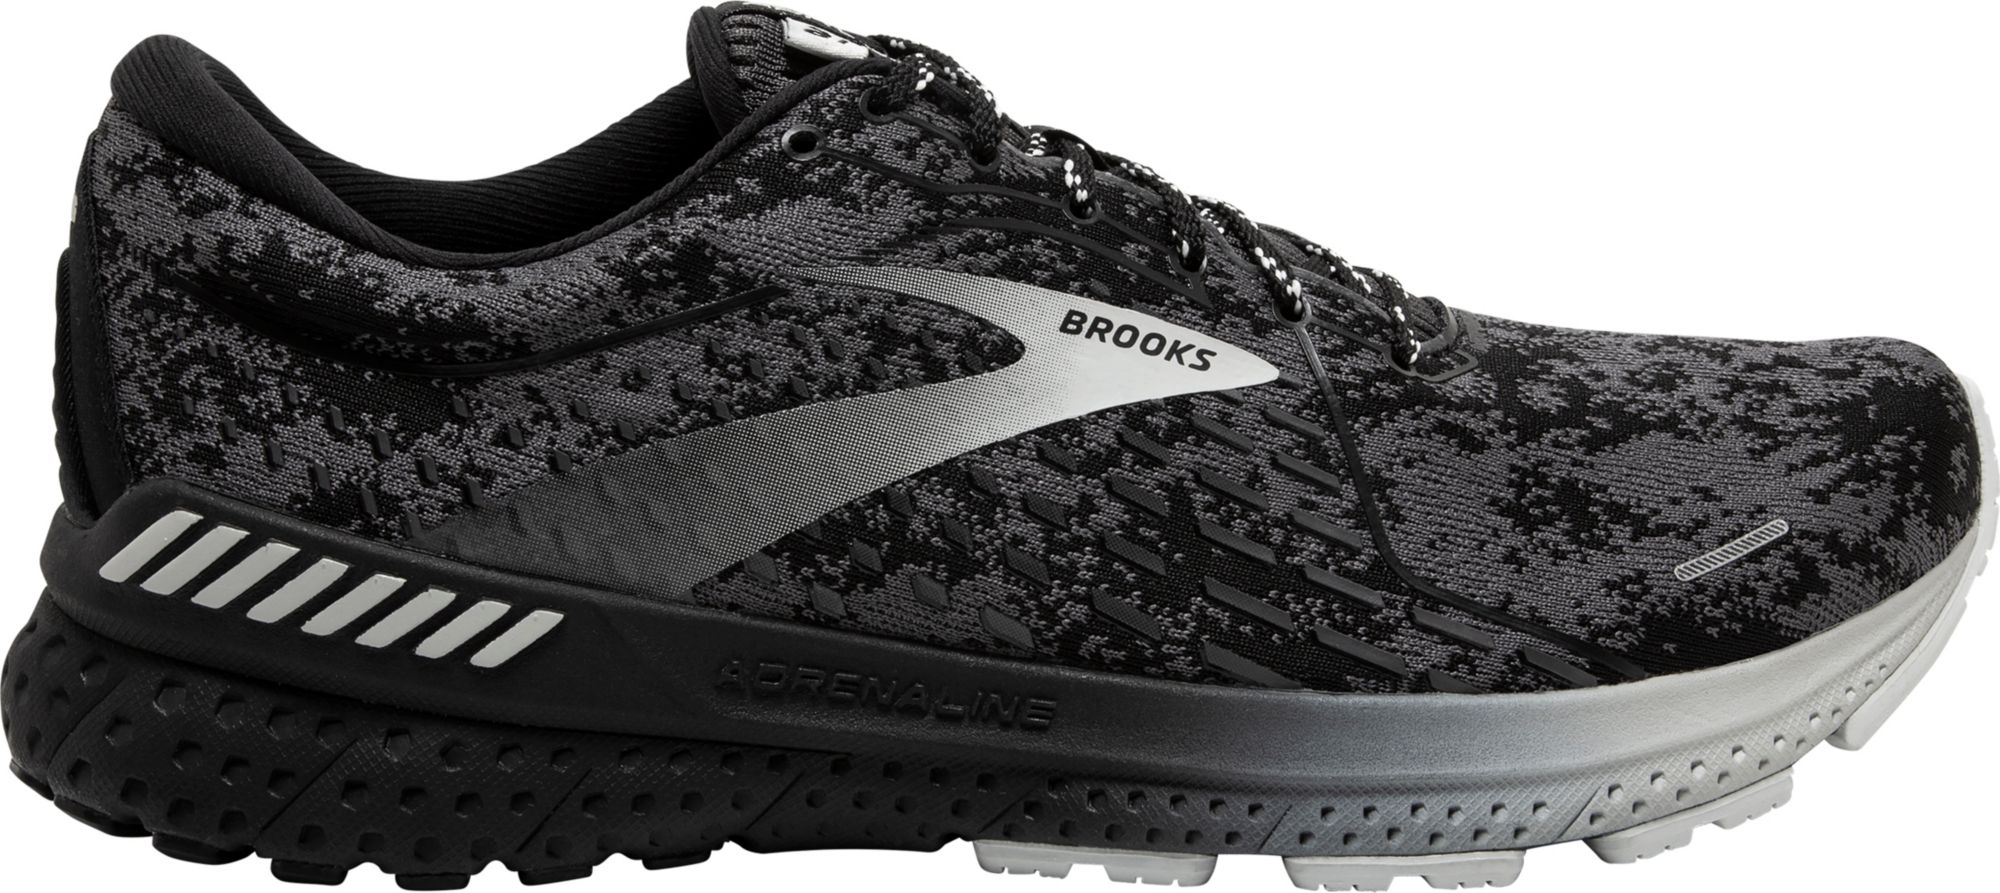 brooks shoes cost